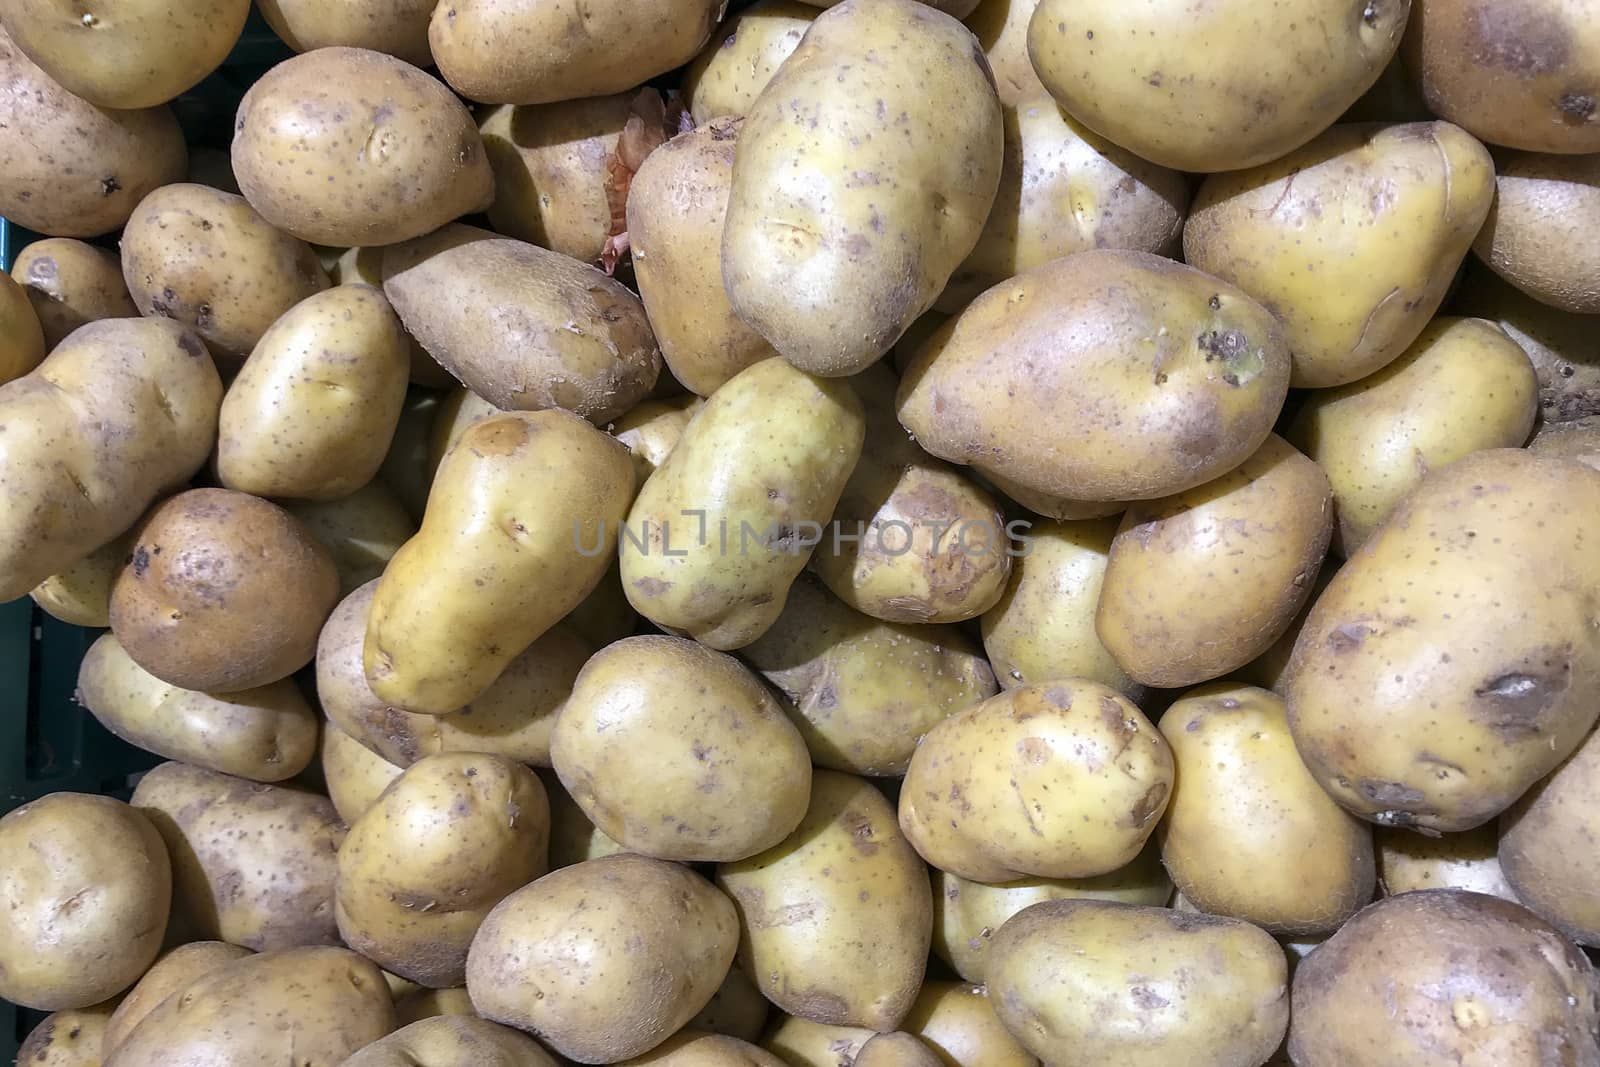 Many potatoes many sizes for cooking